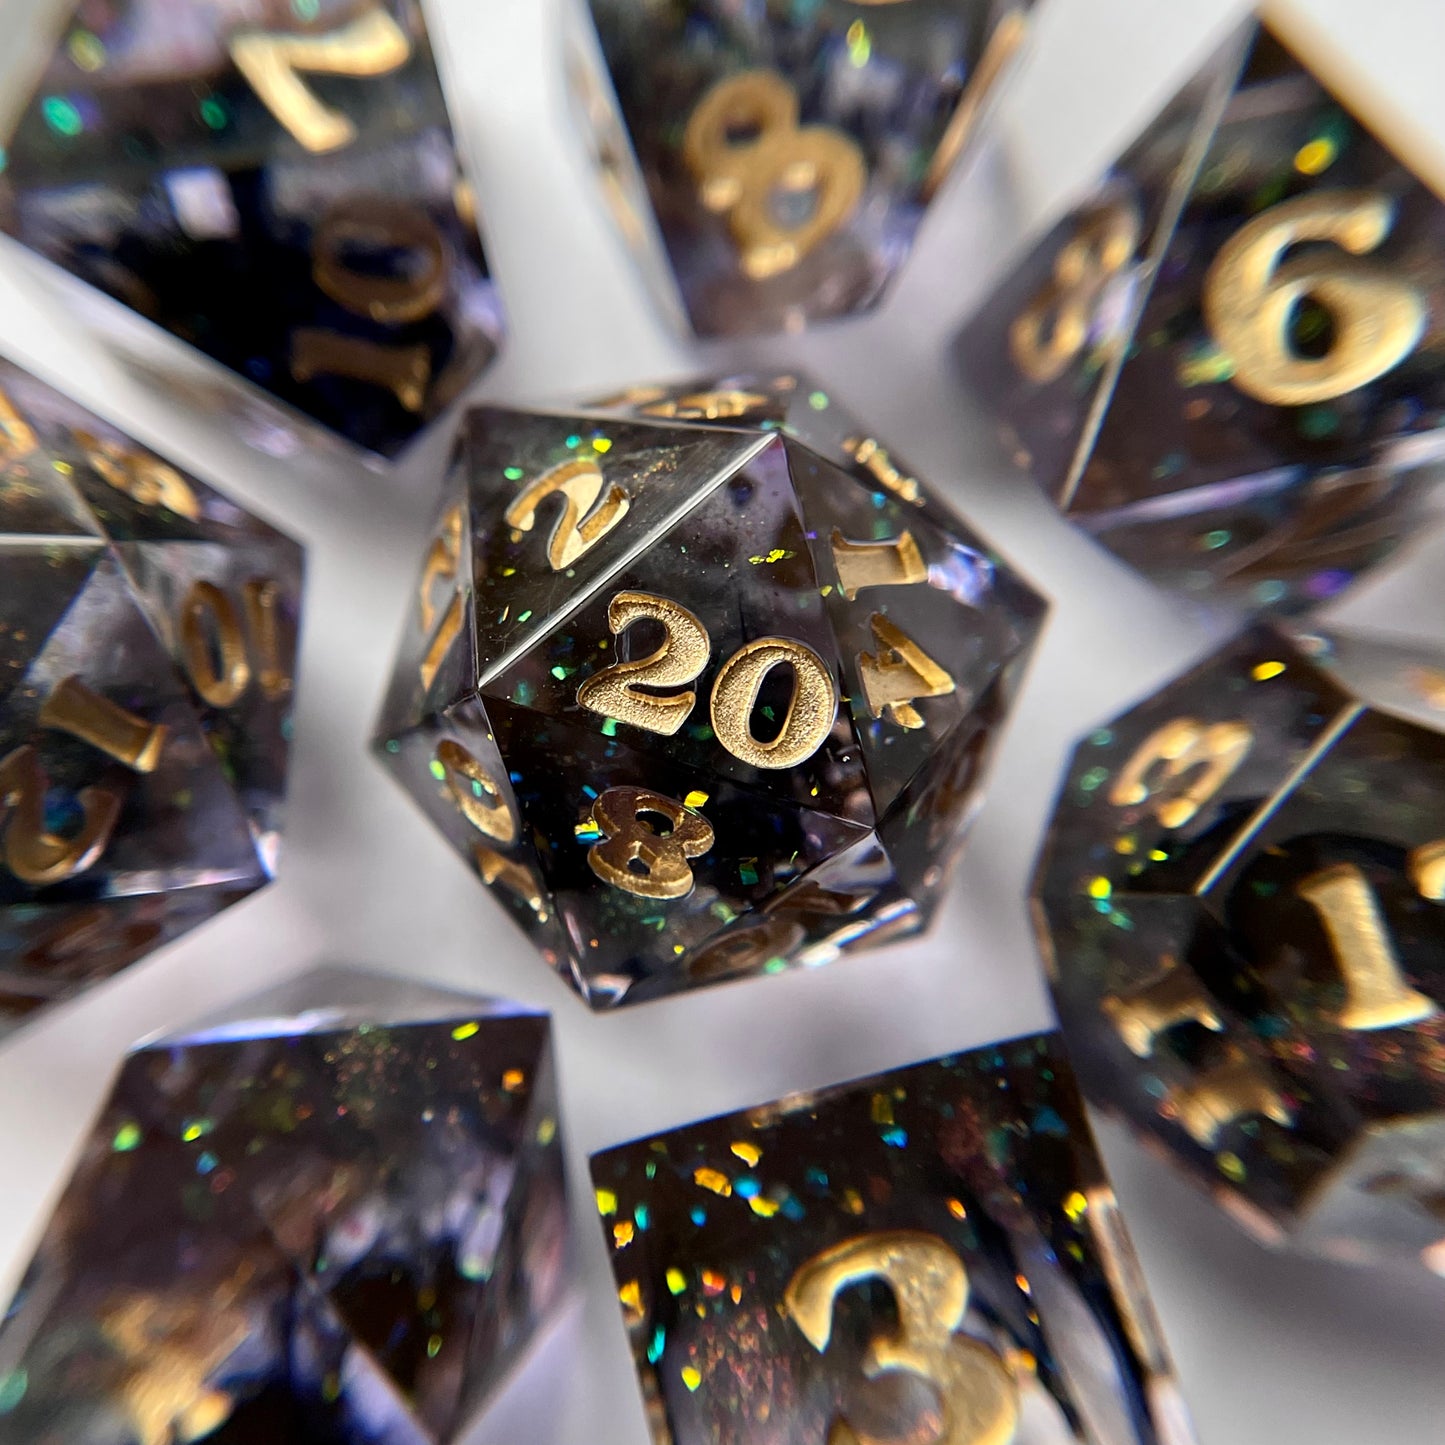 Aether – Single D20